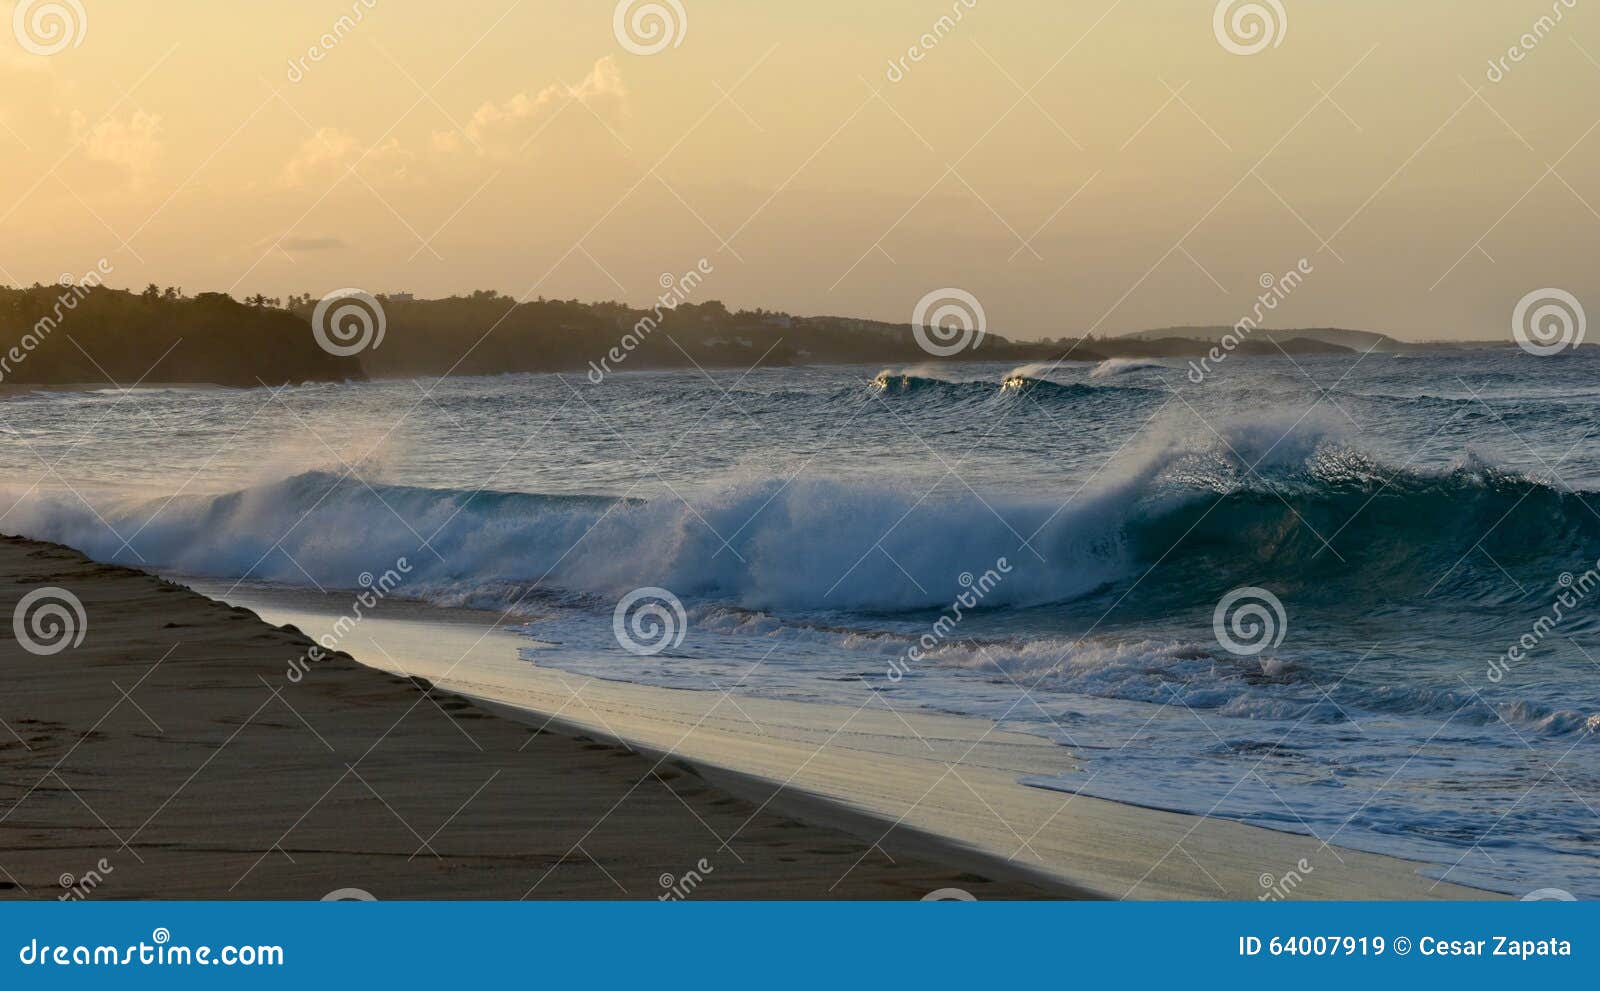 waves during sunset at a surfers caribbean beach, puerto rico